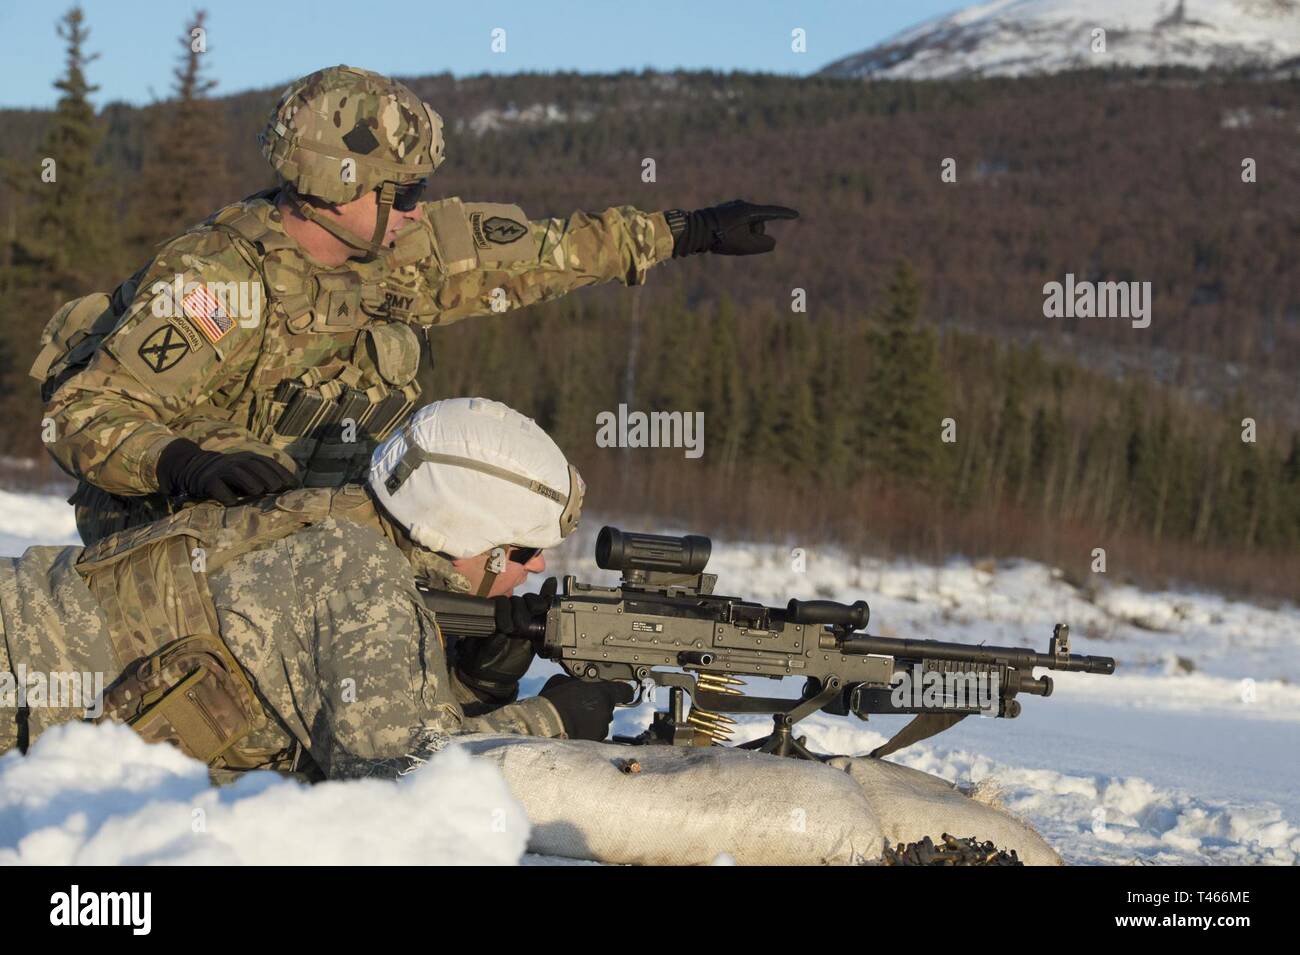 Army Sgt. James Cascio, top, directs Sgt. Trenton Fussell’s fire during M240L machine gun during live-fire training at Grezelka range, Joint Base Elmendorf-Richardson, Alaska, March 4, 2019. Utilizing the M249 light machine gun and M240L machine gun, Spartan paratroopers assigned to Blackfoot Company, 1st Battalion, 501st Parachute Infantry Regiment, 4th Infantry Brigade Combat Team (Airborne), 25th Infantry Division, U.S. Army Alaska, honed their marksmanship skills by engaging multiple targets at varying distances. Stock Photo